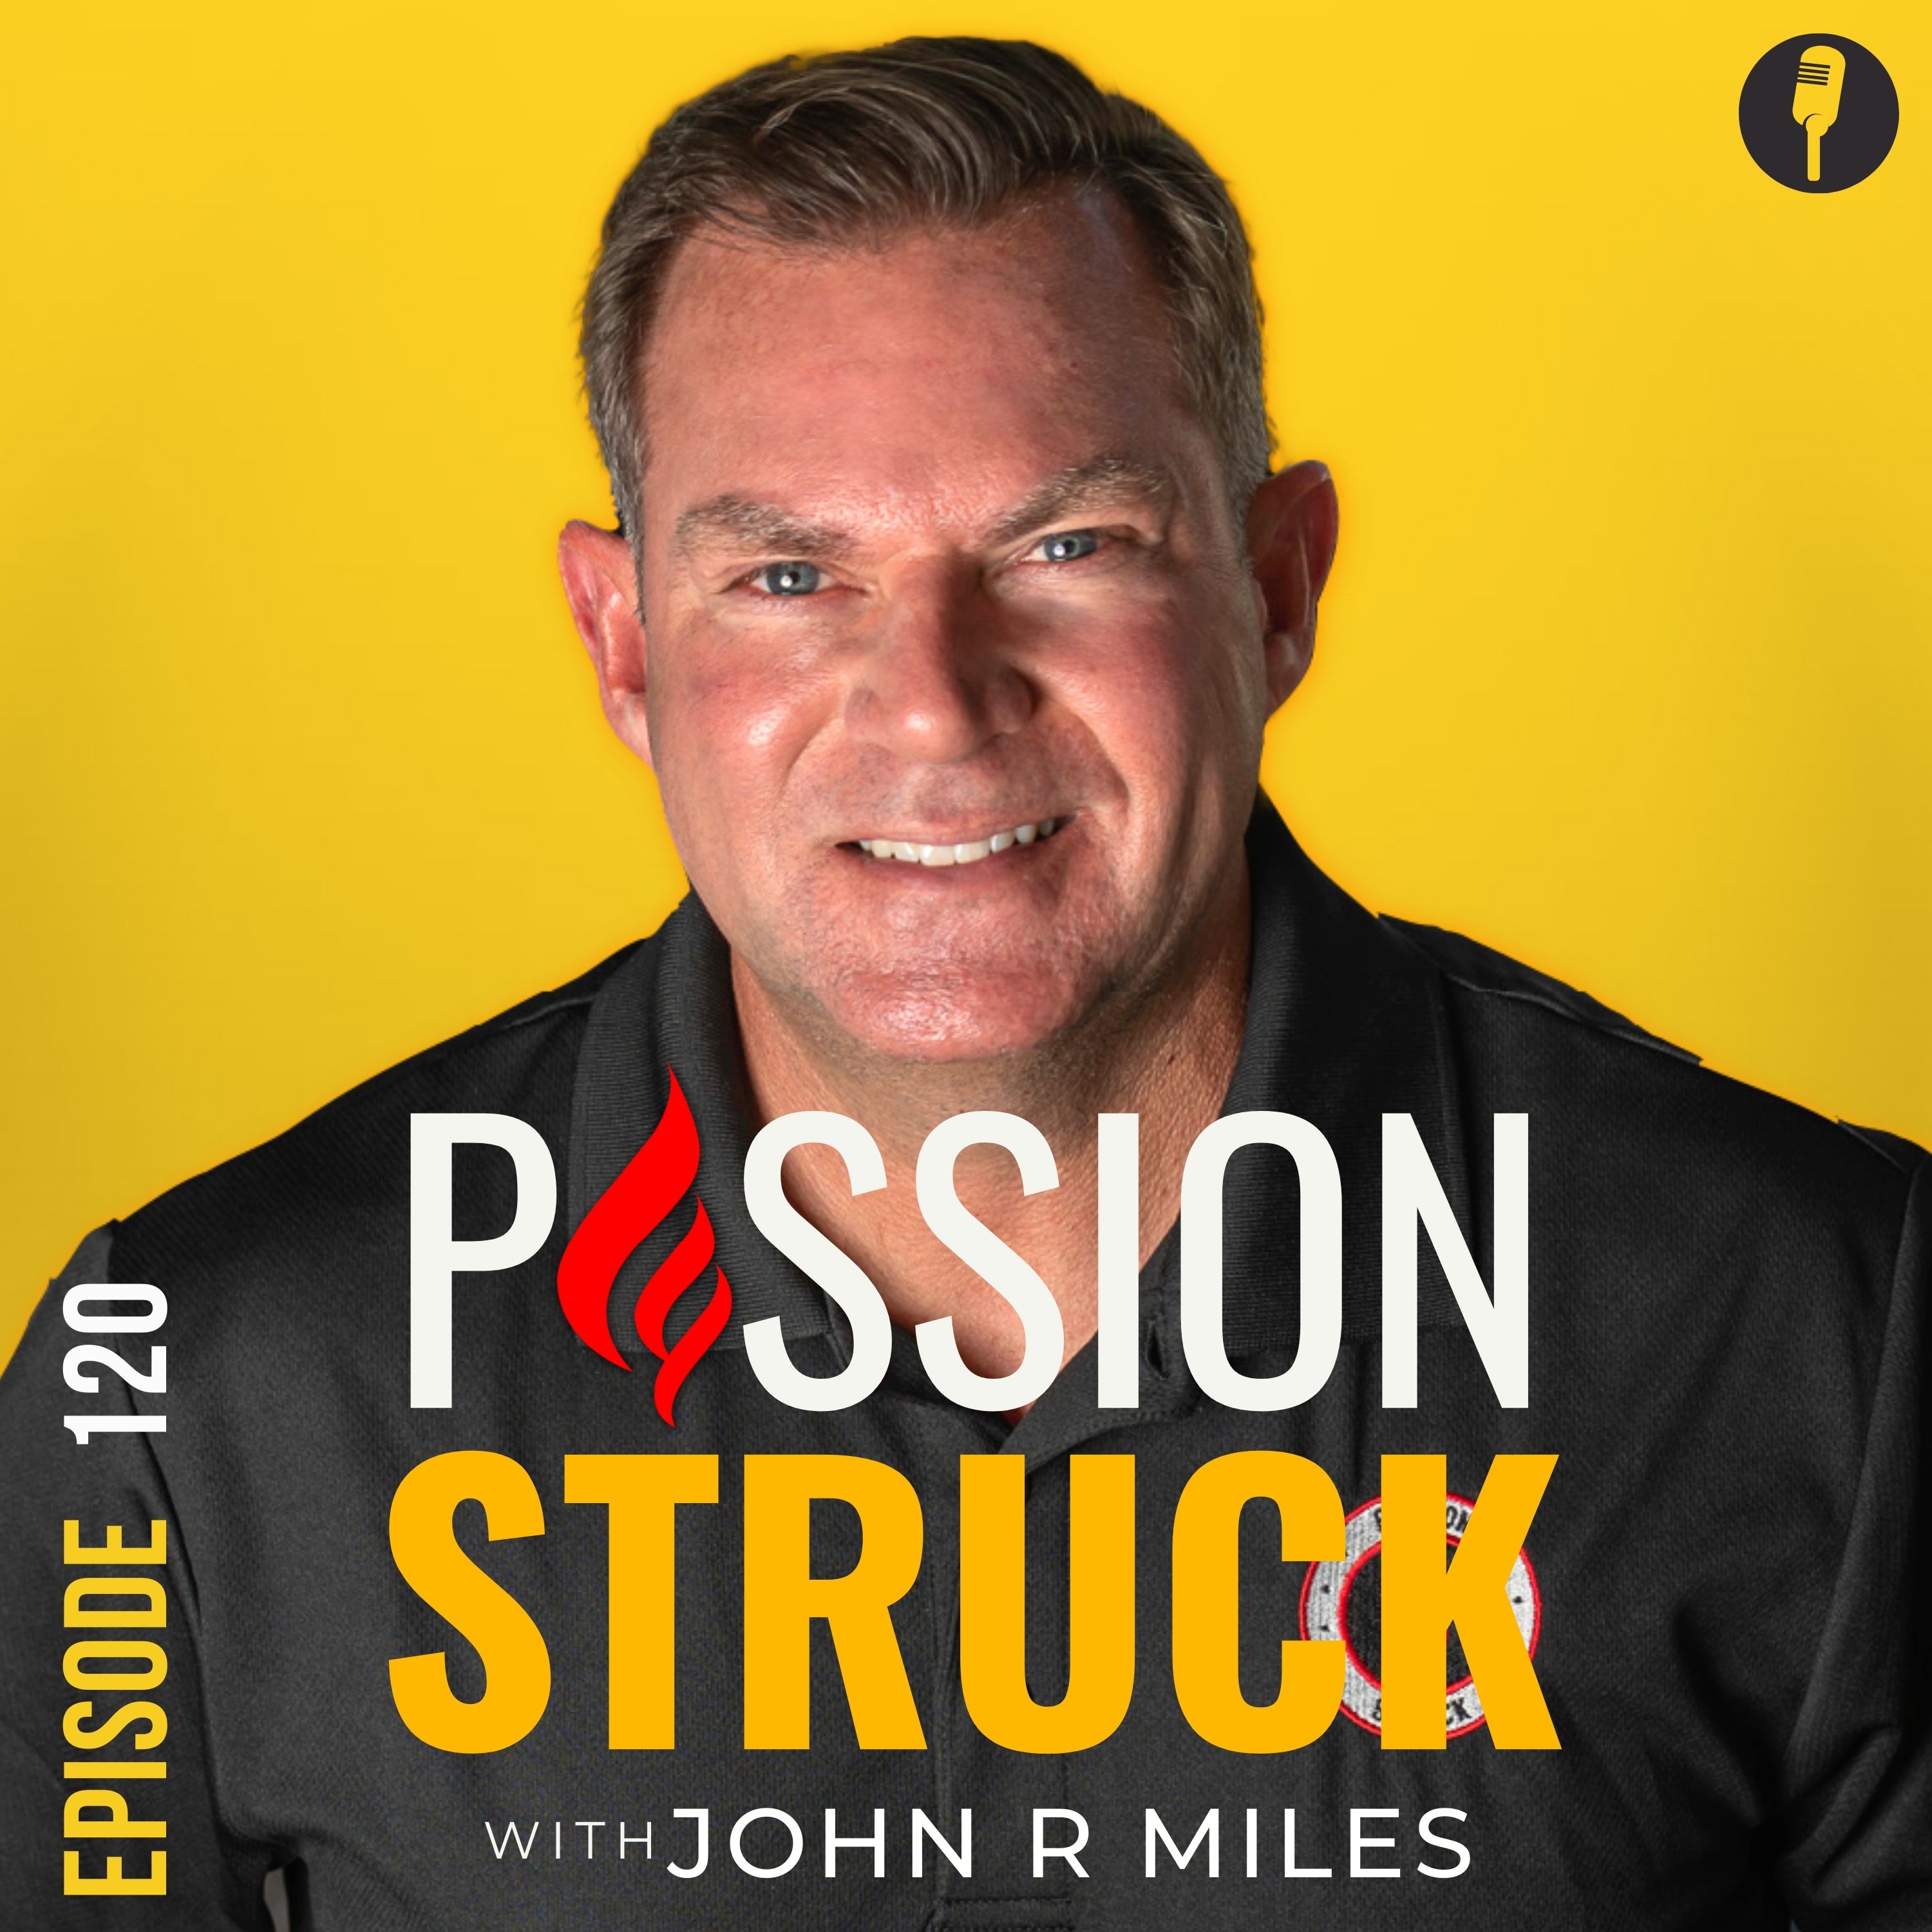 Passion Struck with John R. Miles episode 120 on how to create true success